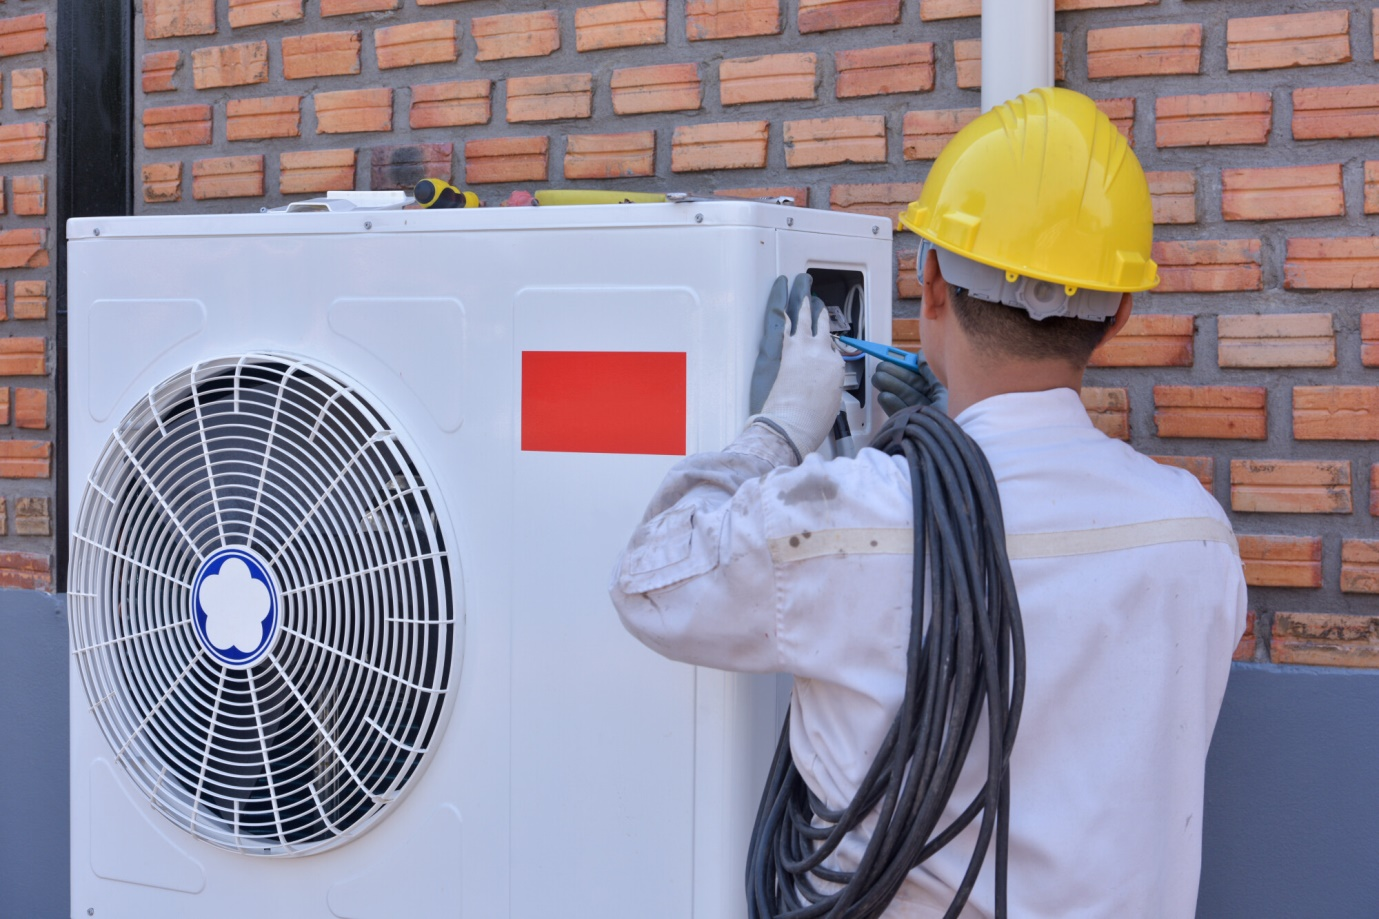 Top 3 Sure Signs You Need HVAC Help